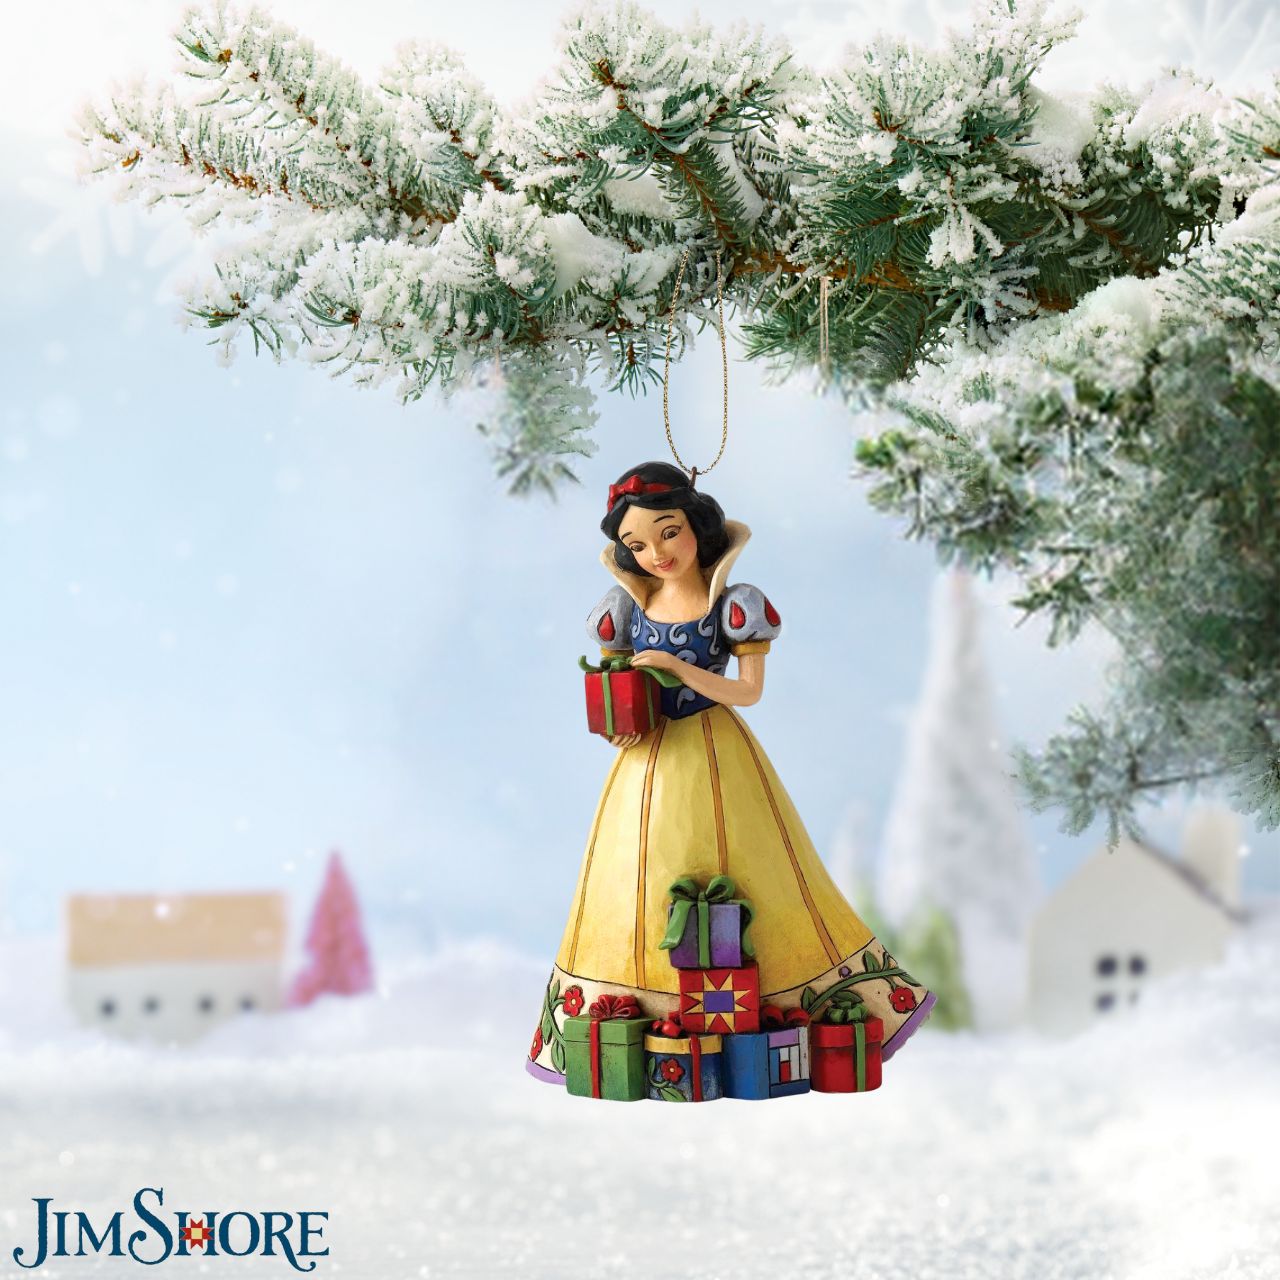 Jim Shore Disney Snow White Hanging Ornament  Disney Traditions combines the magic of Disney with the festive artistry of Jim Shore. This Snow White cast stone hanging ornament is sure to add Disney's magic to your Christmas tree. Unique variations should be expected as this product is hand painted. 